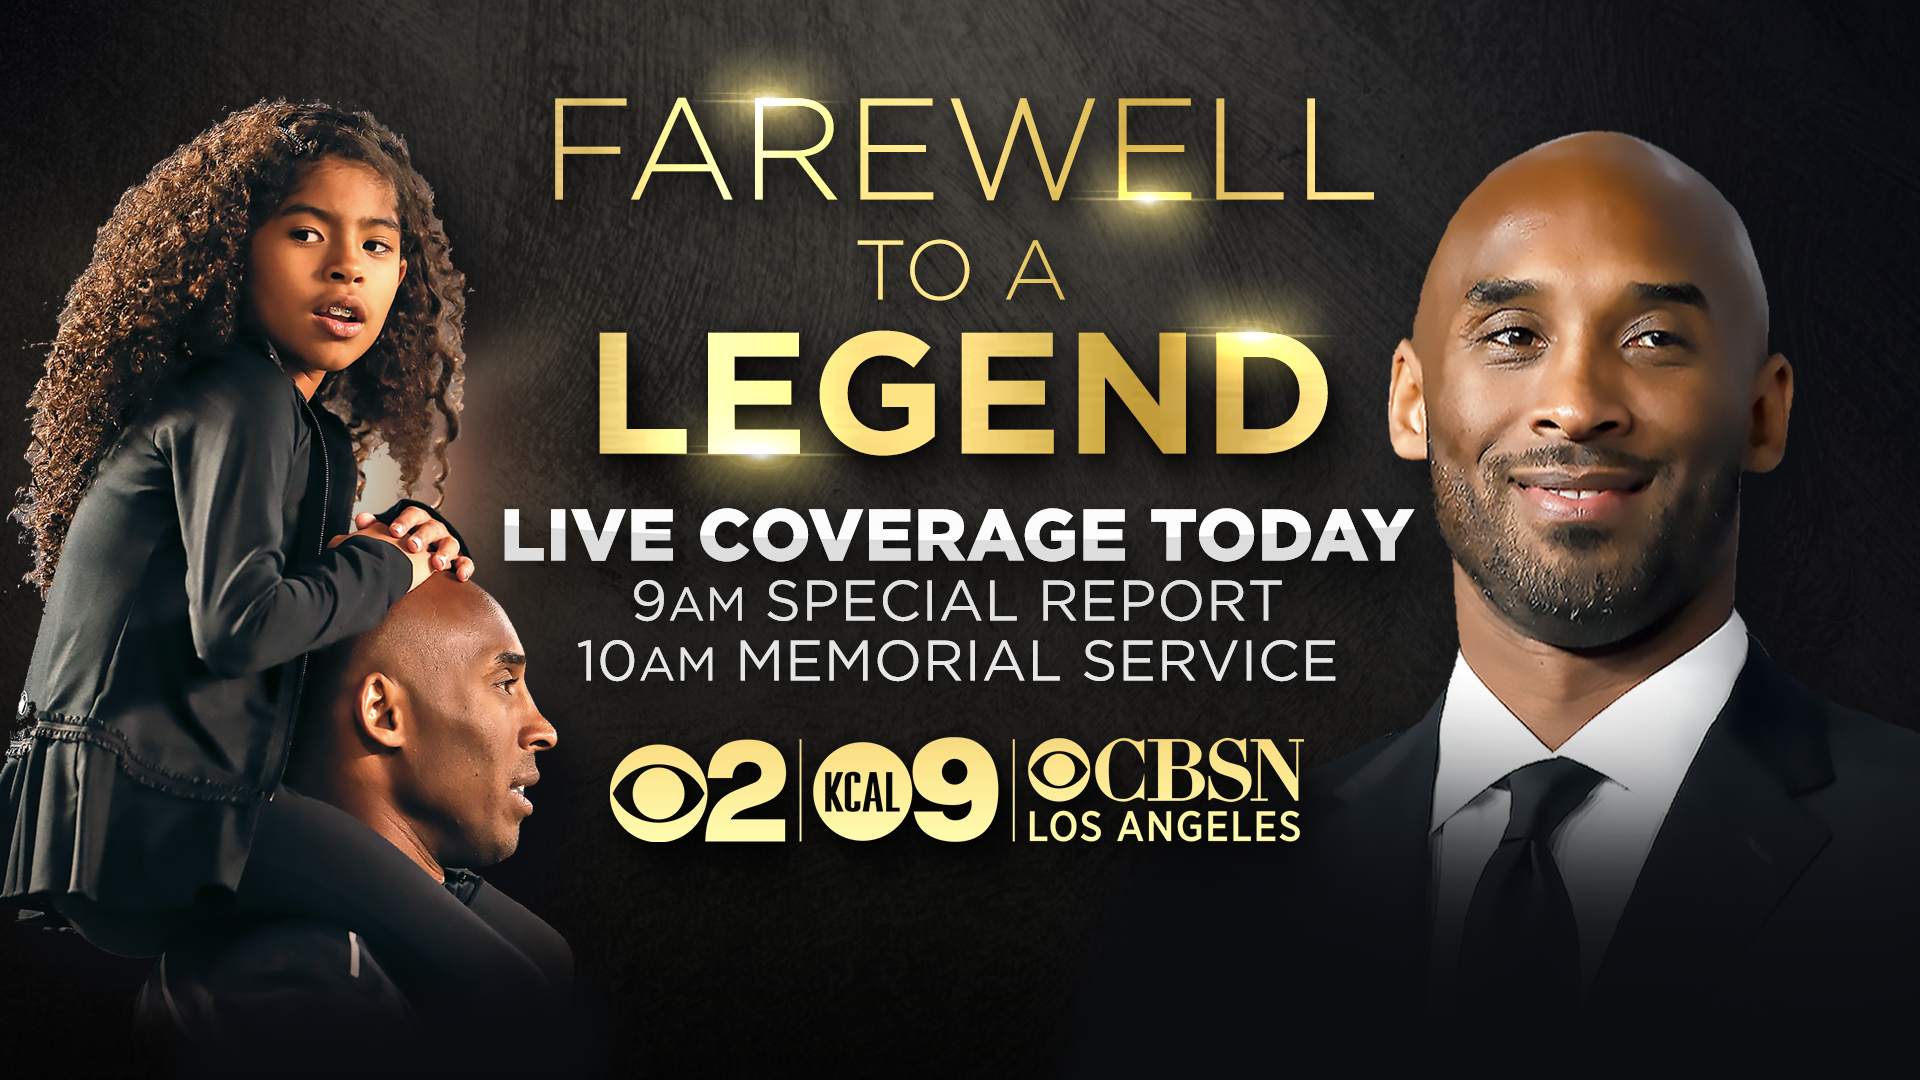 Kobe And Gianna Bryant's Memorial Service Will Take Place On